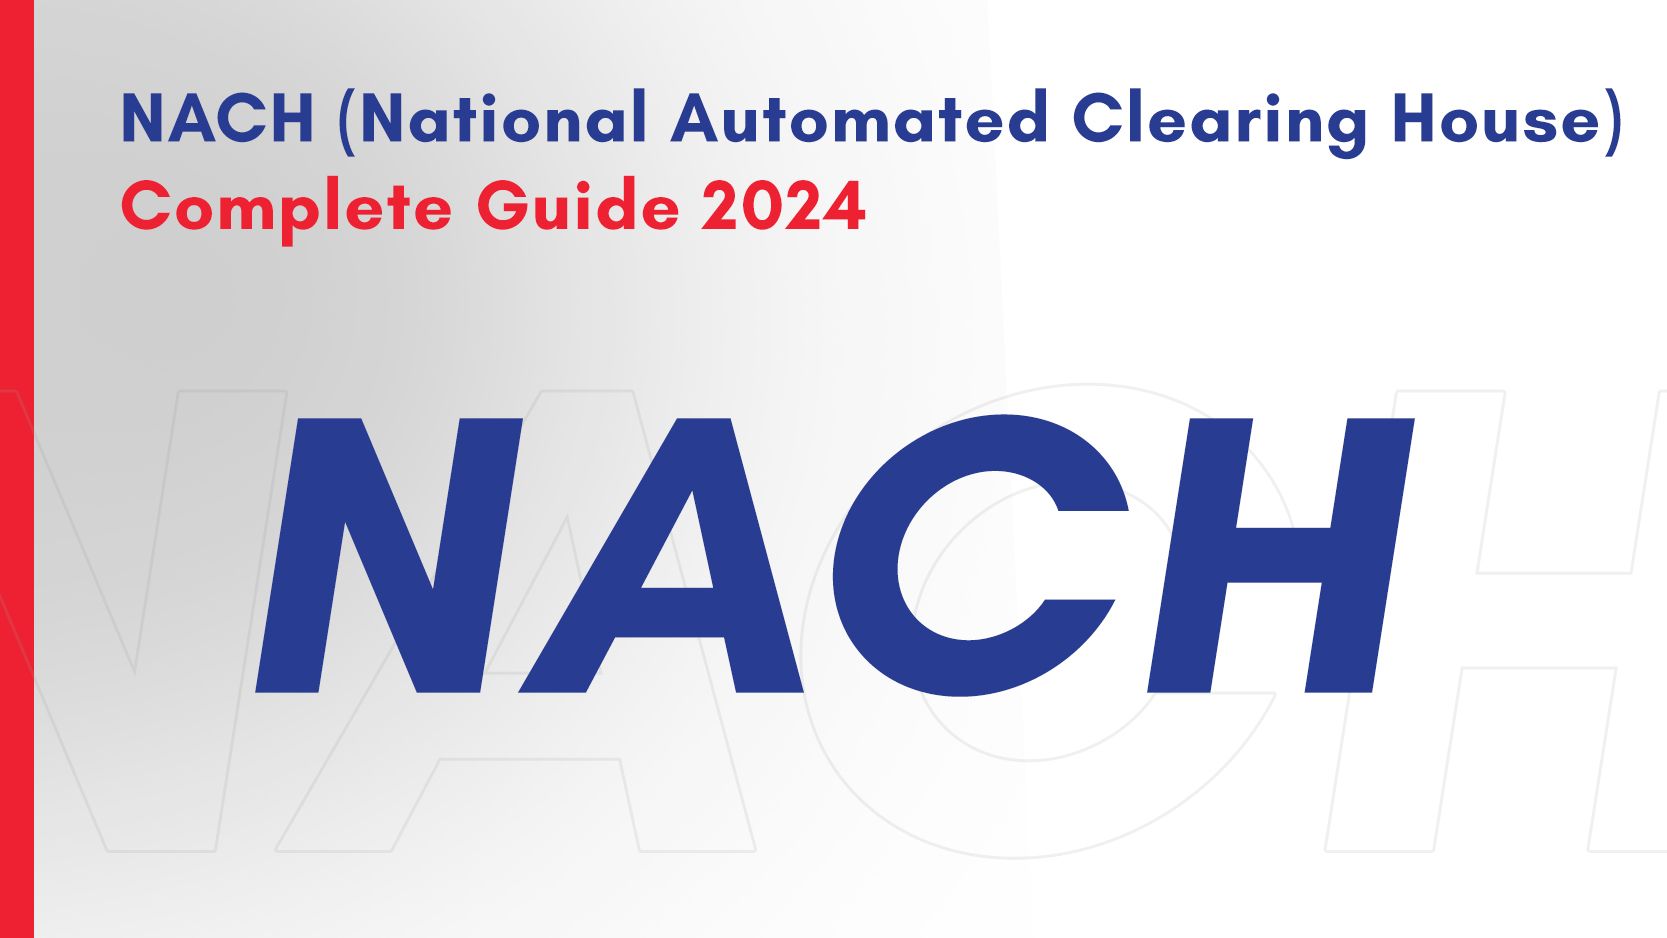 NACH (National Automated Clearing House)
Complete Guide 2024

NACH